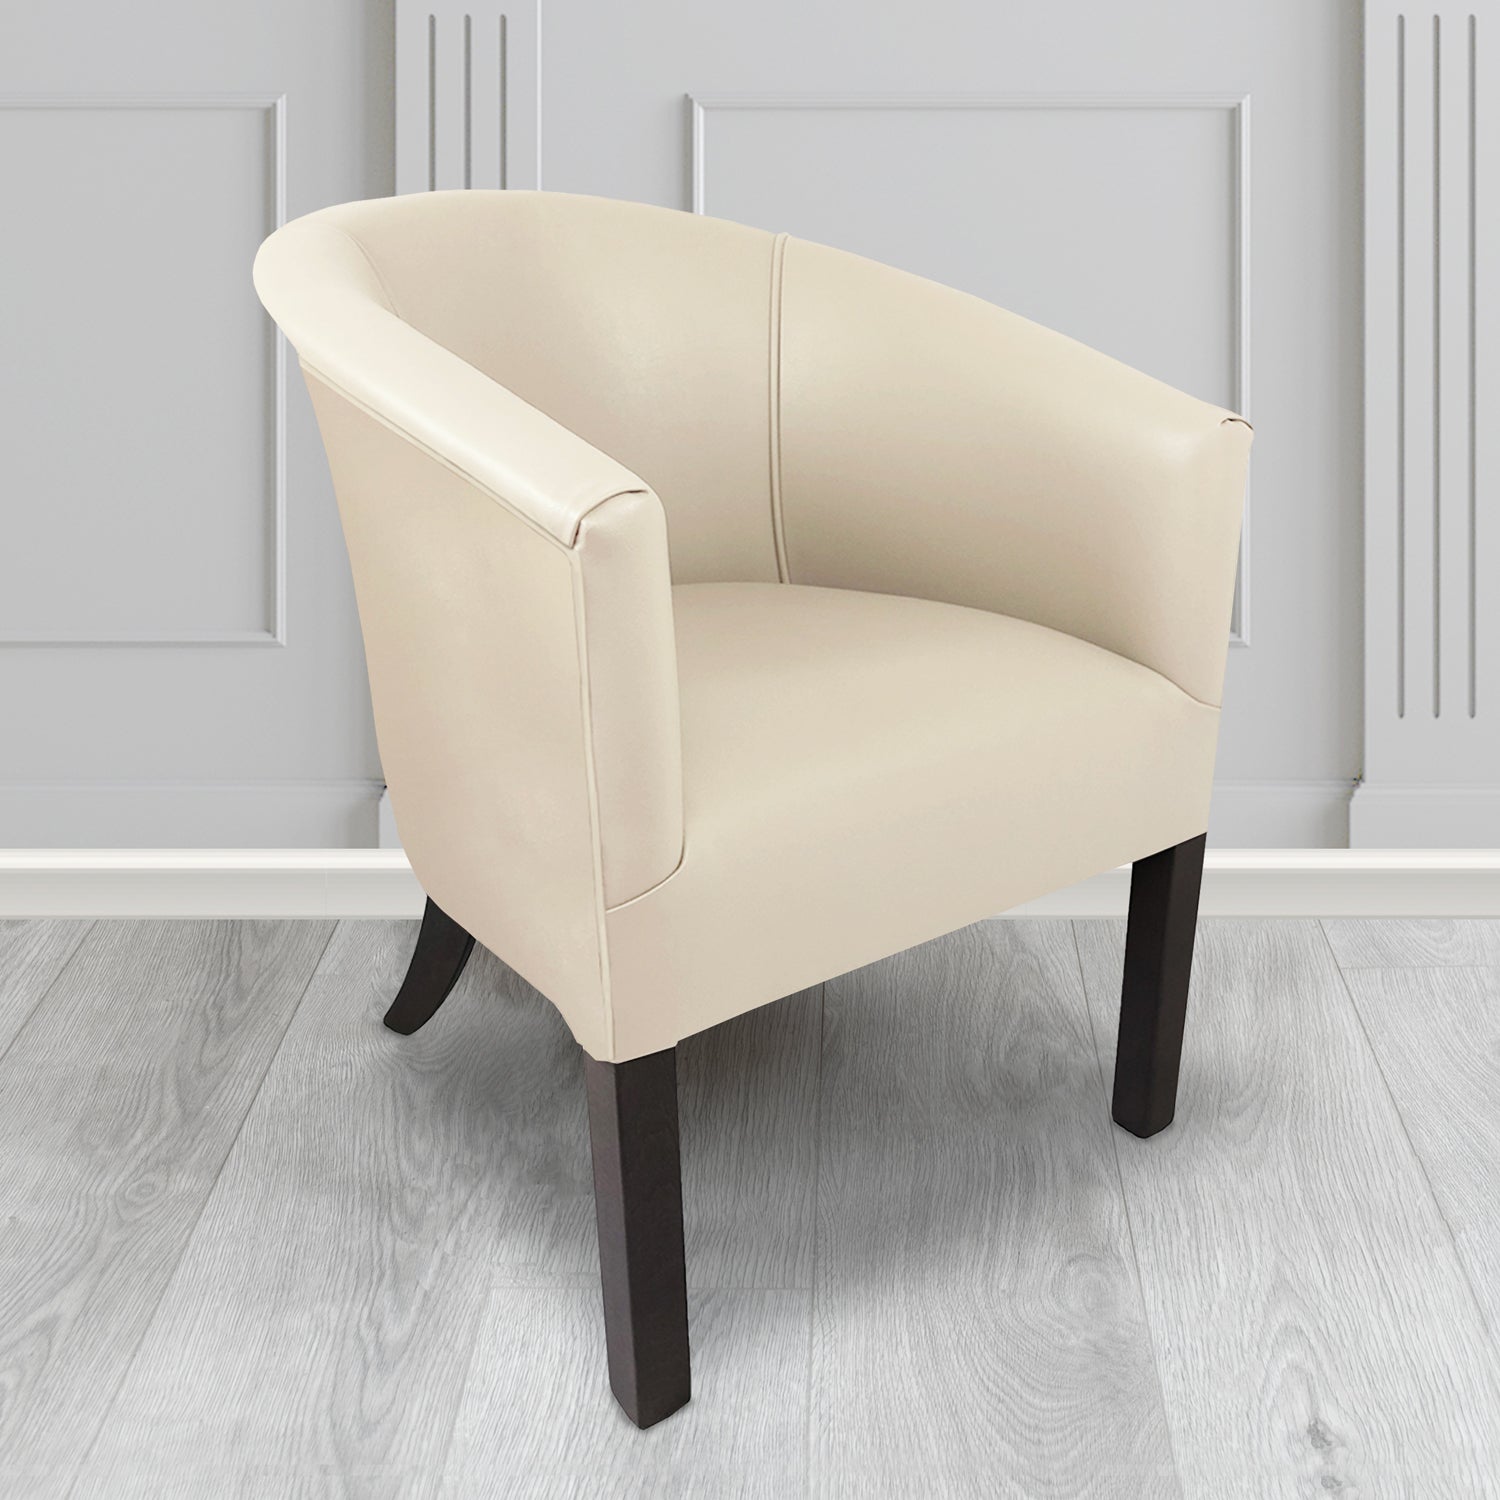 Lewisham Tub Chair in Agua Paint Pot Ivory Crib 5 Faux Leather - Antimicrobial, Stain Resistant & Waterproof - The Tub Chair Shop